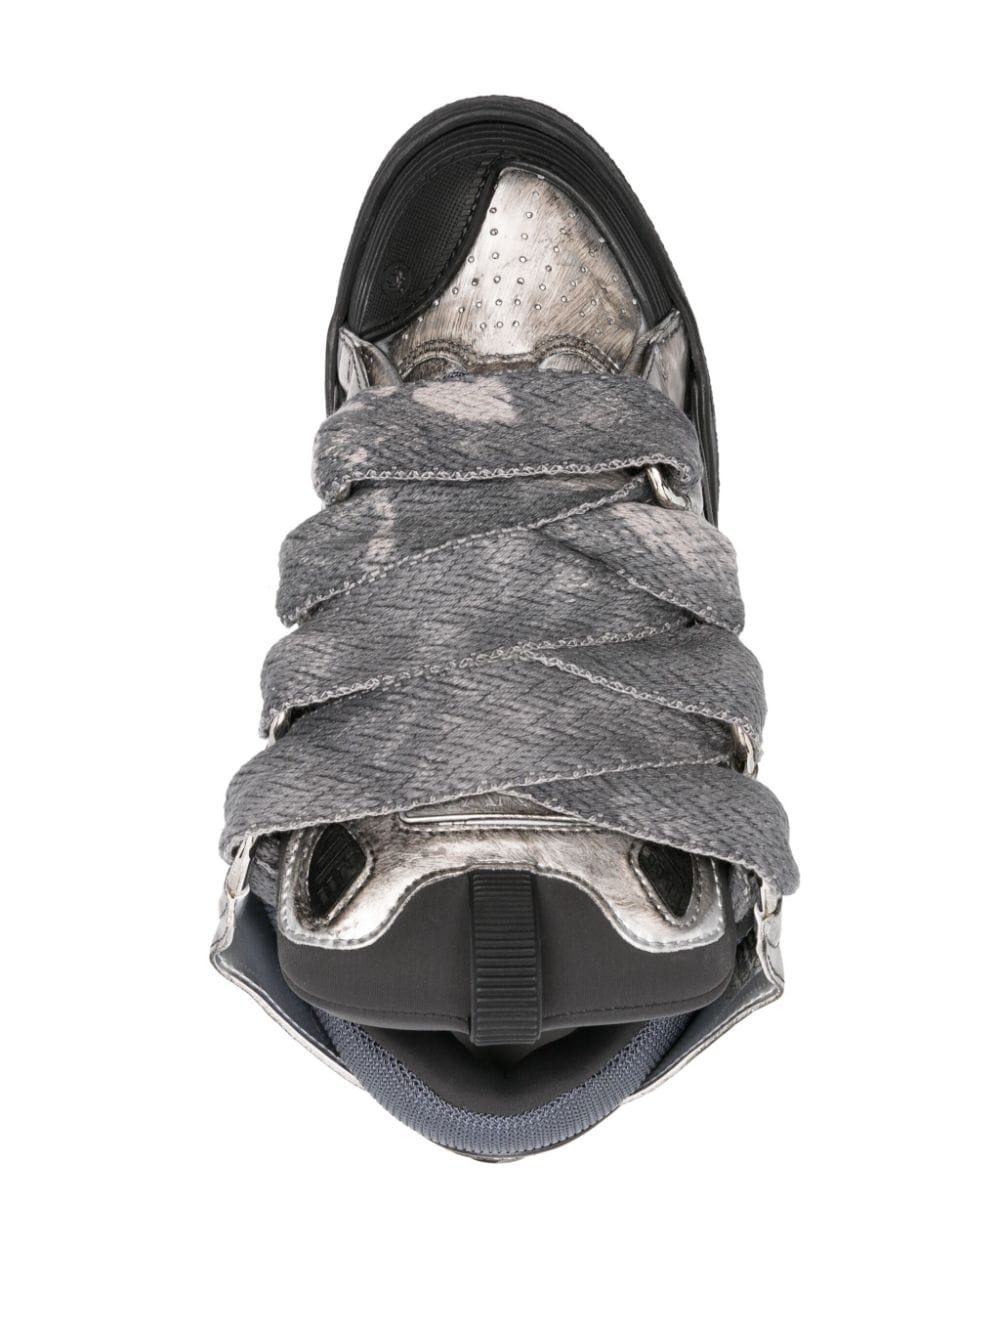 Curb chunky leather sneakers - 4